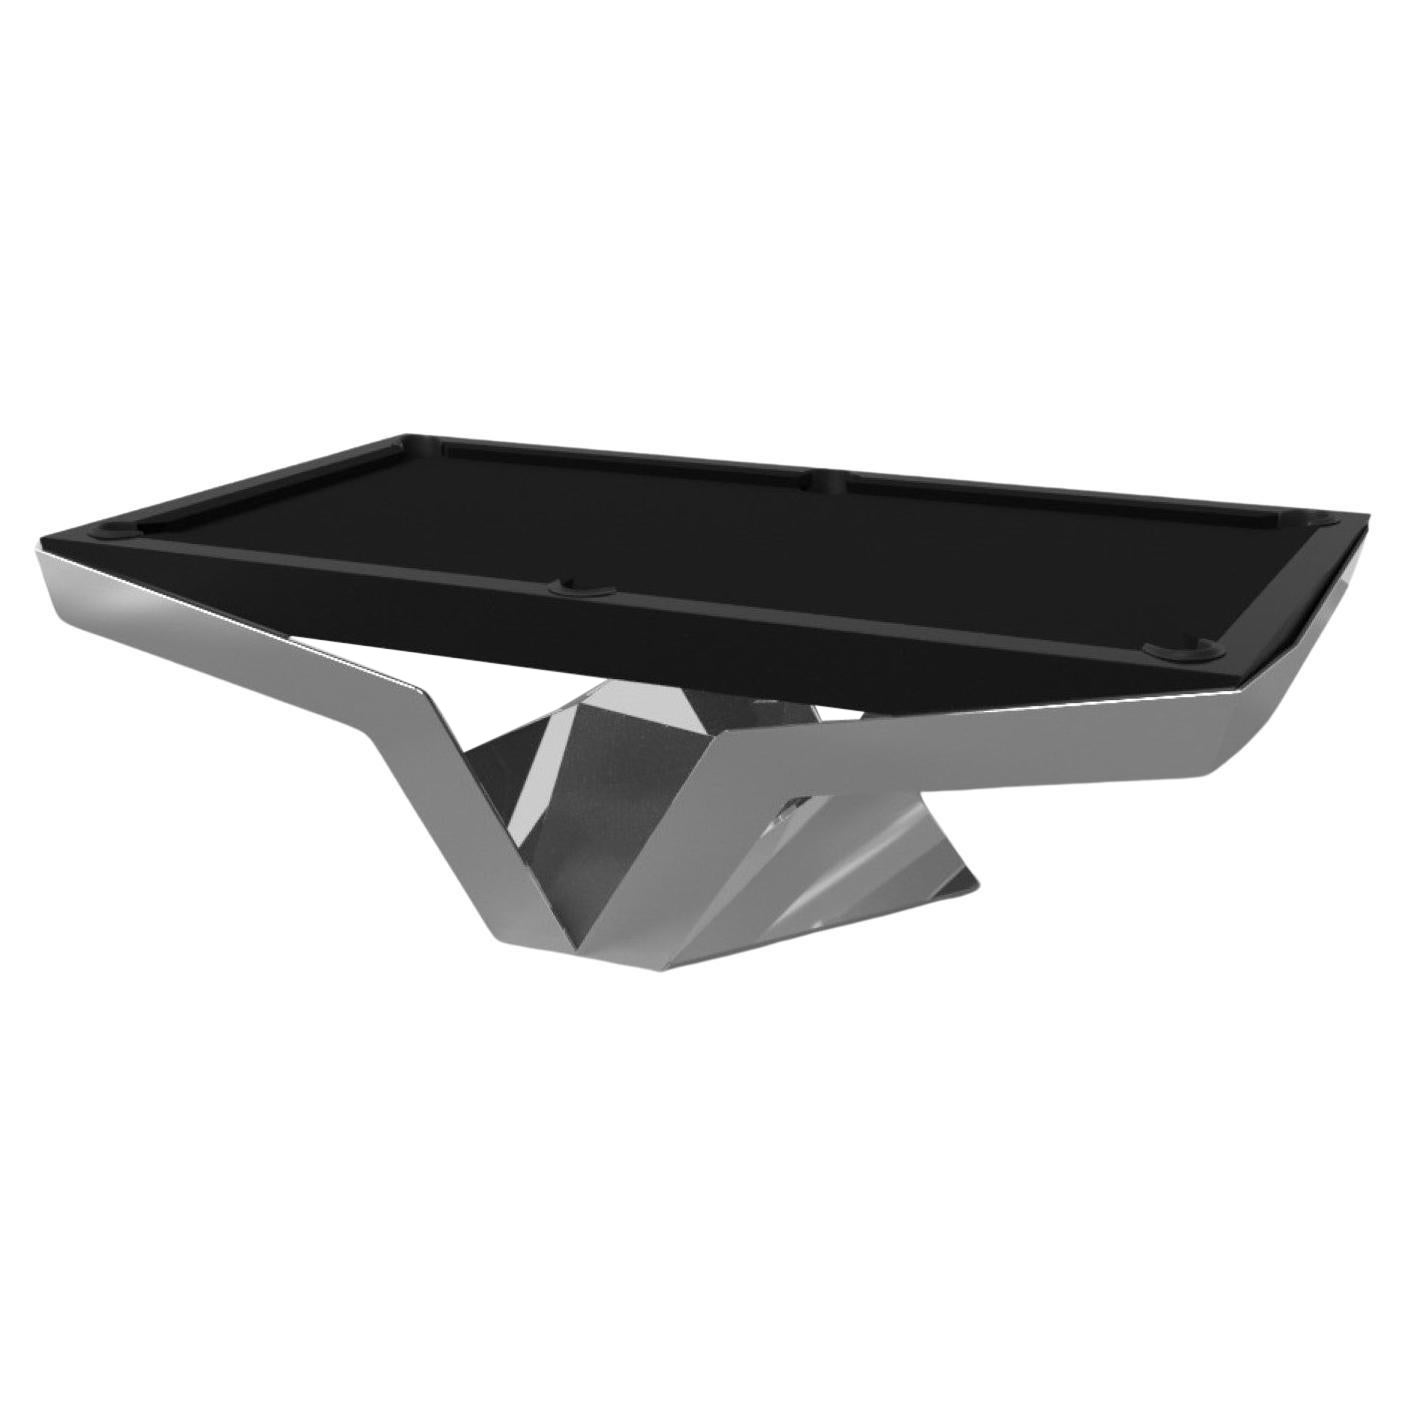 Elevate Customs Enzo Pool Table / Stainless Steel Metal in 8.5' - Made in USA For Sale